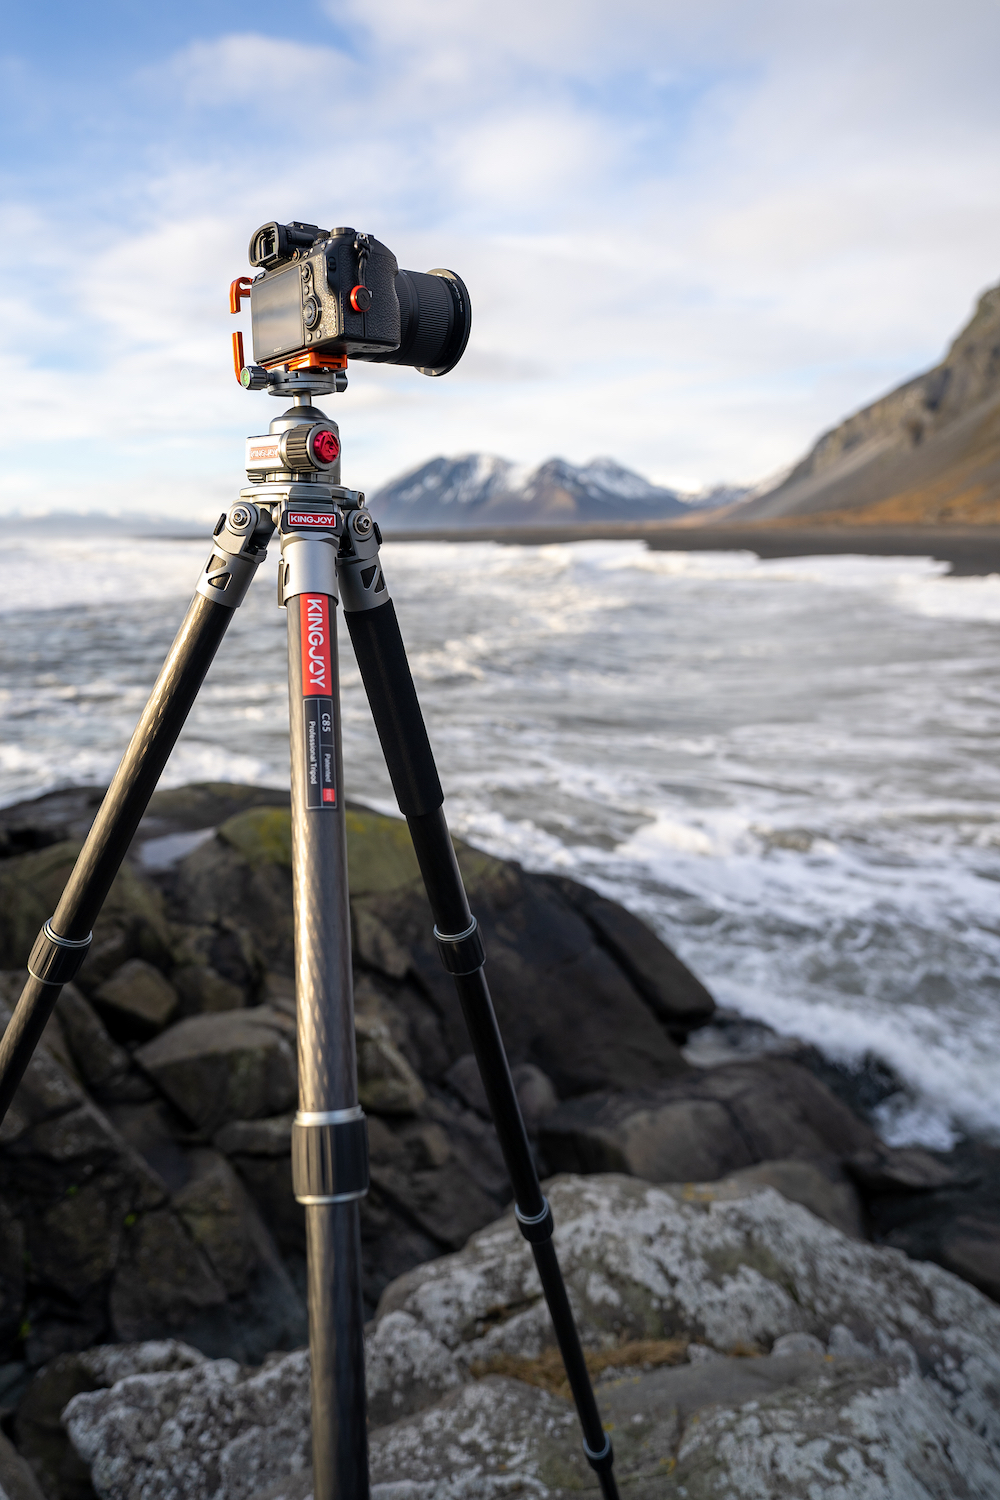 The Kingjoy SolidRock C85 tripod being used in Iceland